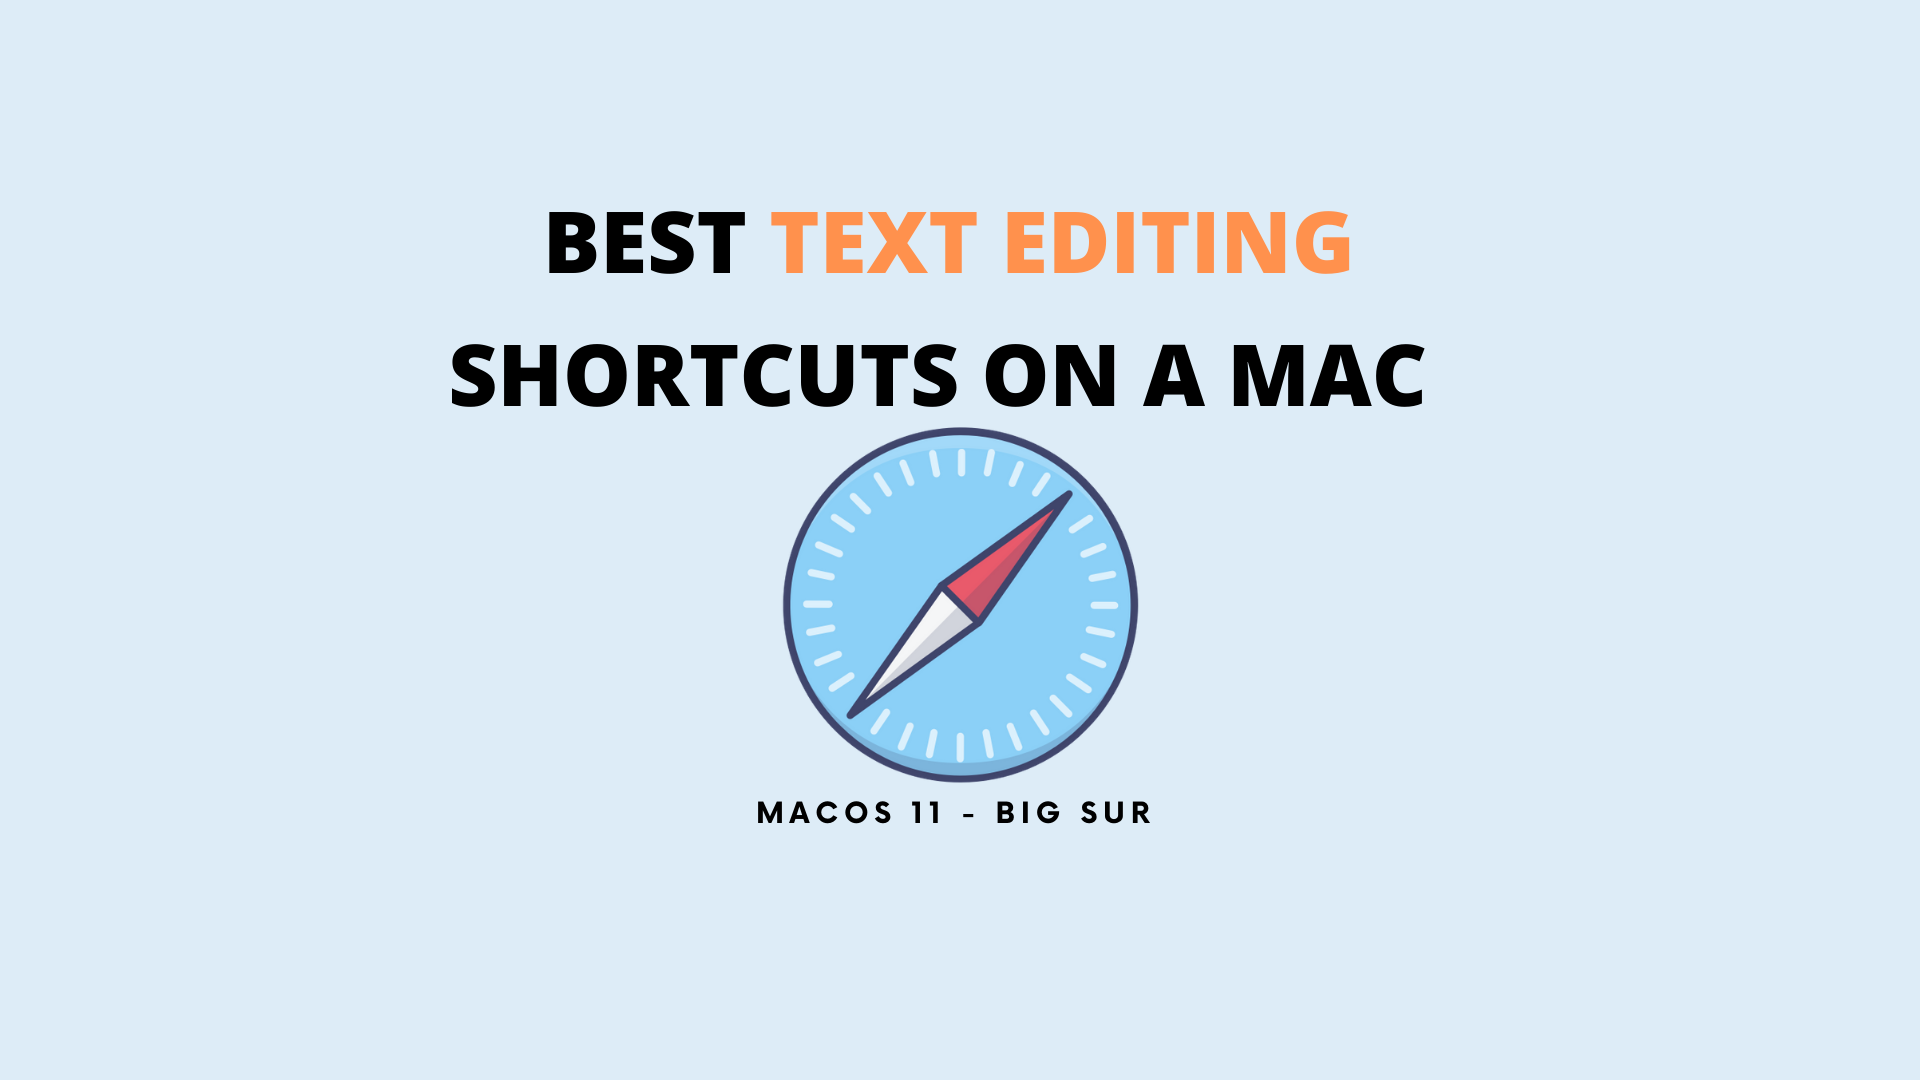 Best Text Editing Shortcuts on a Mac